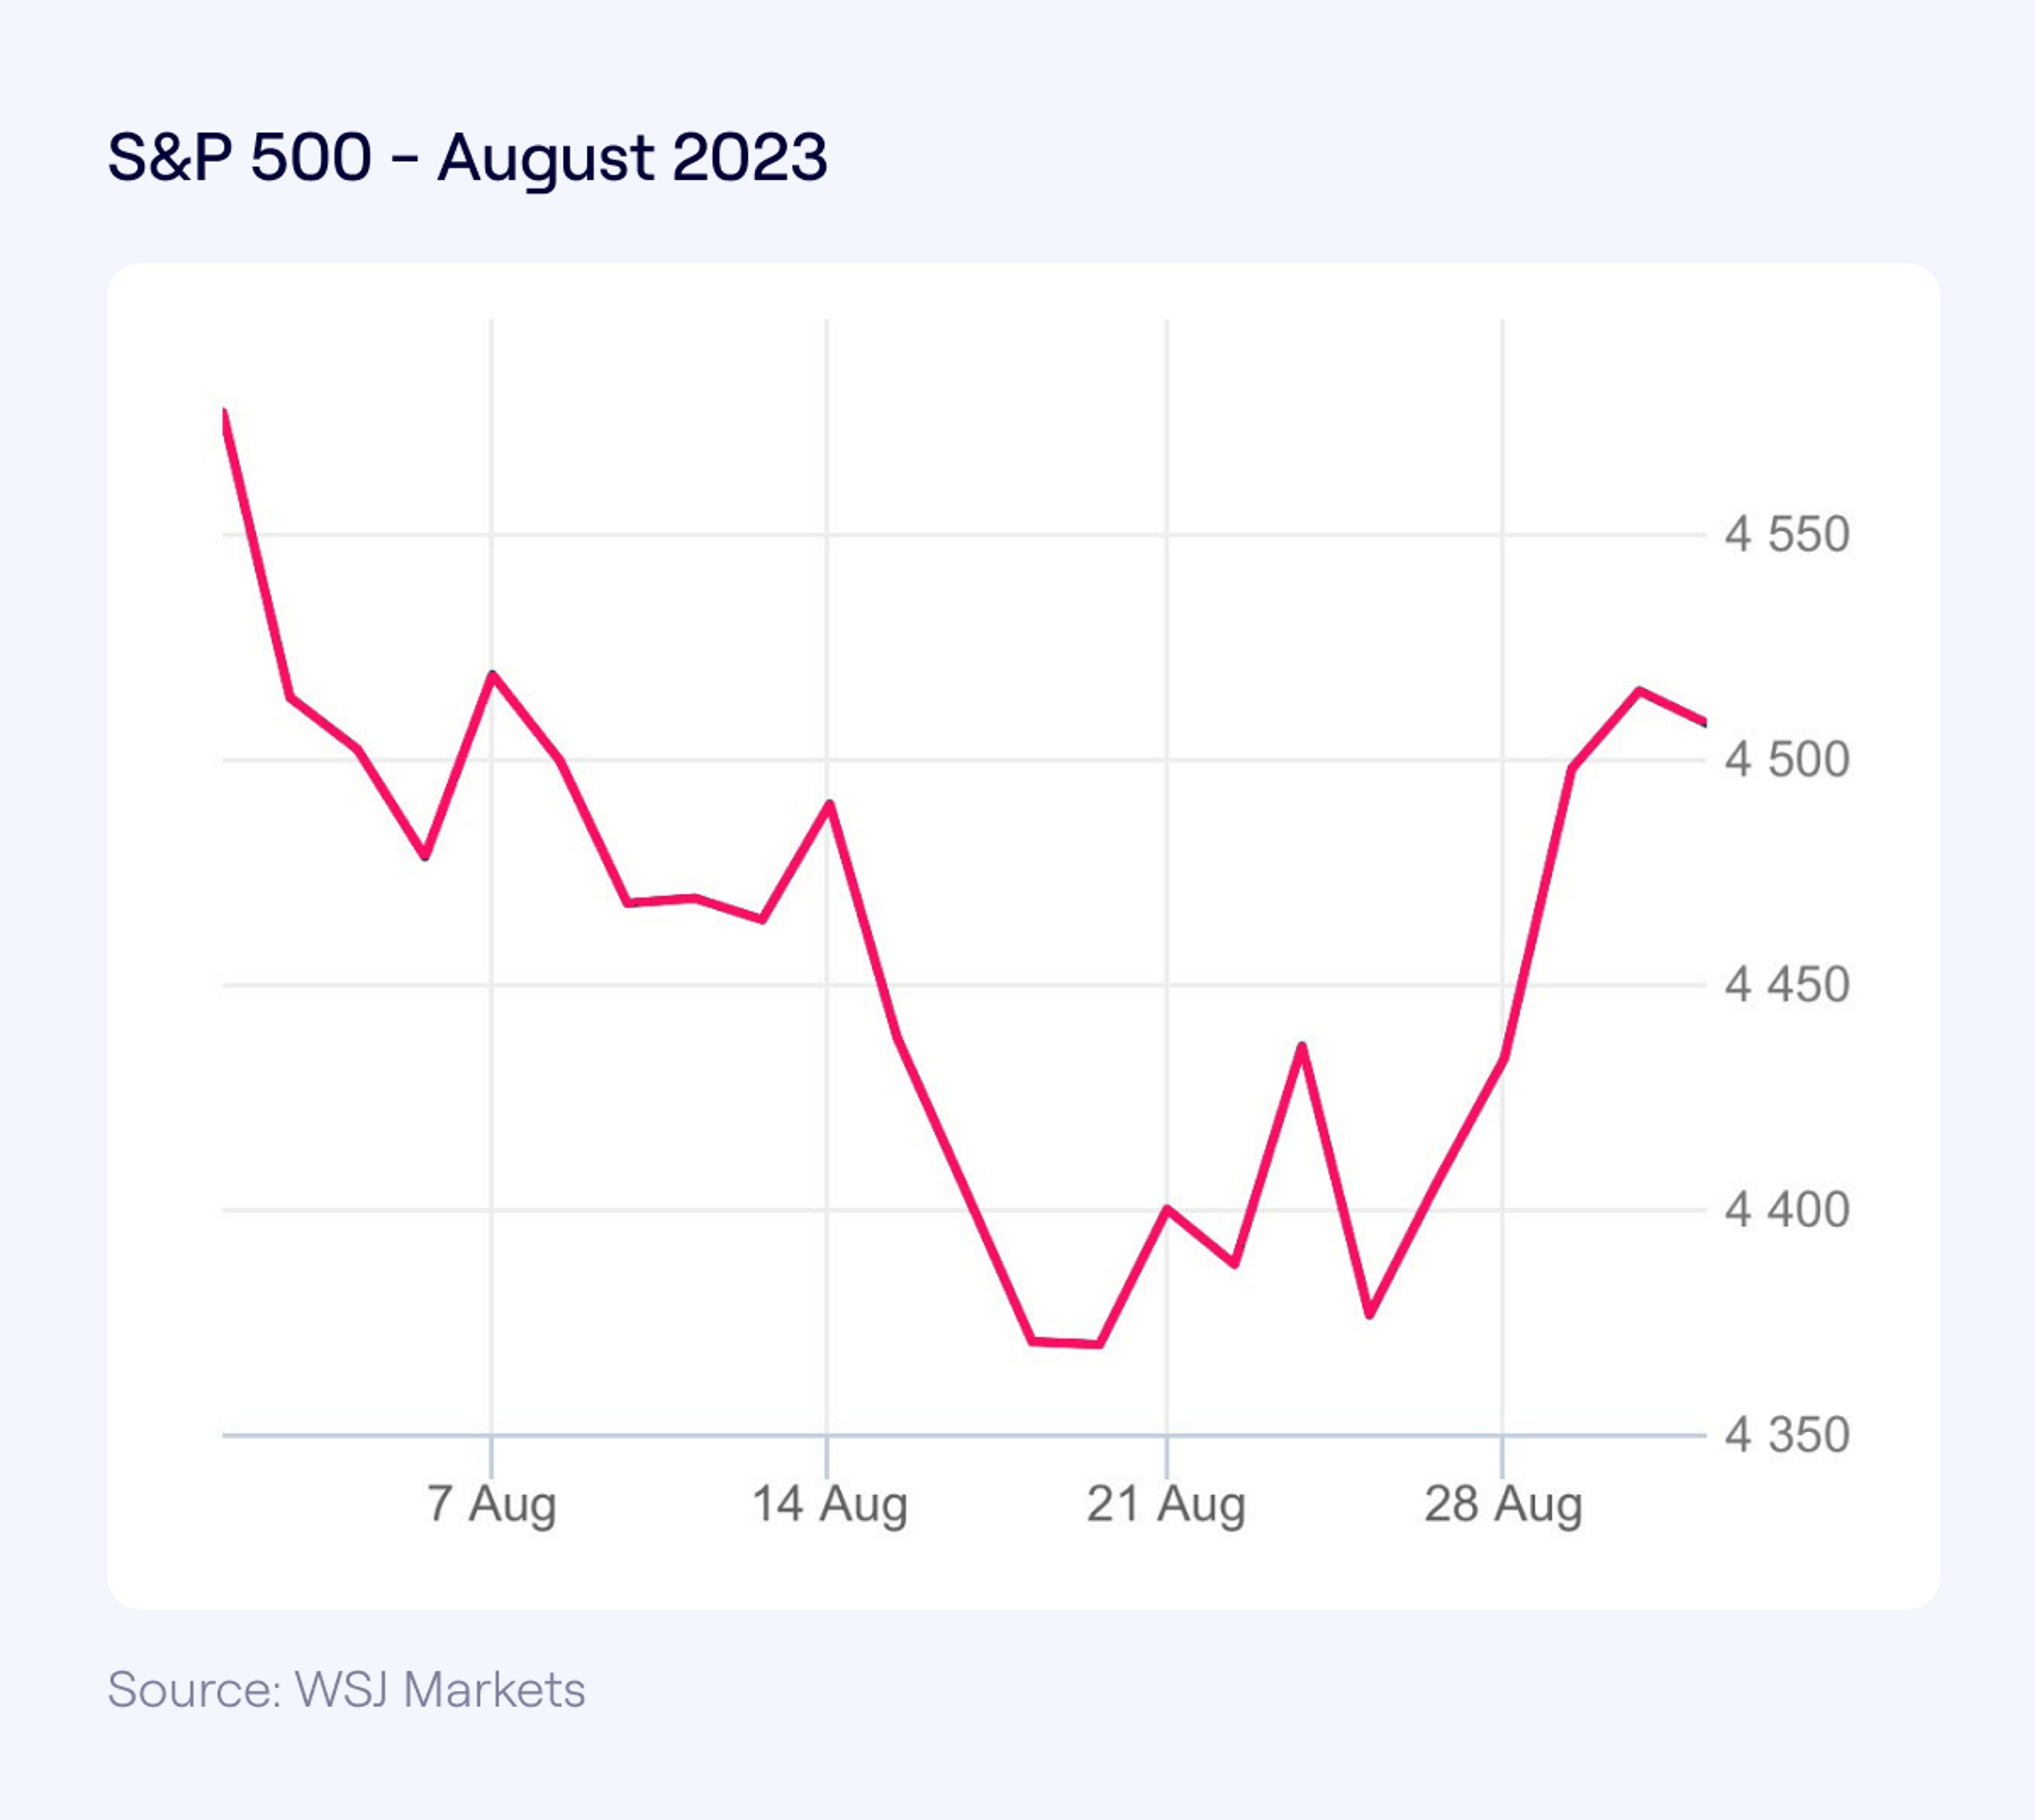 S&P500 August 2023